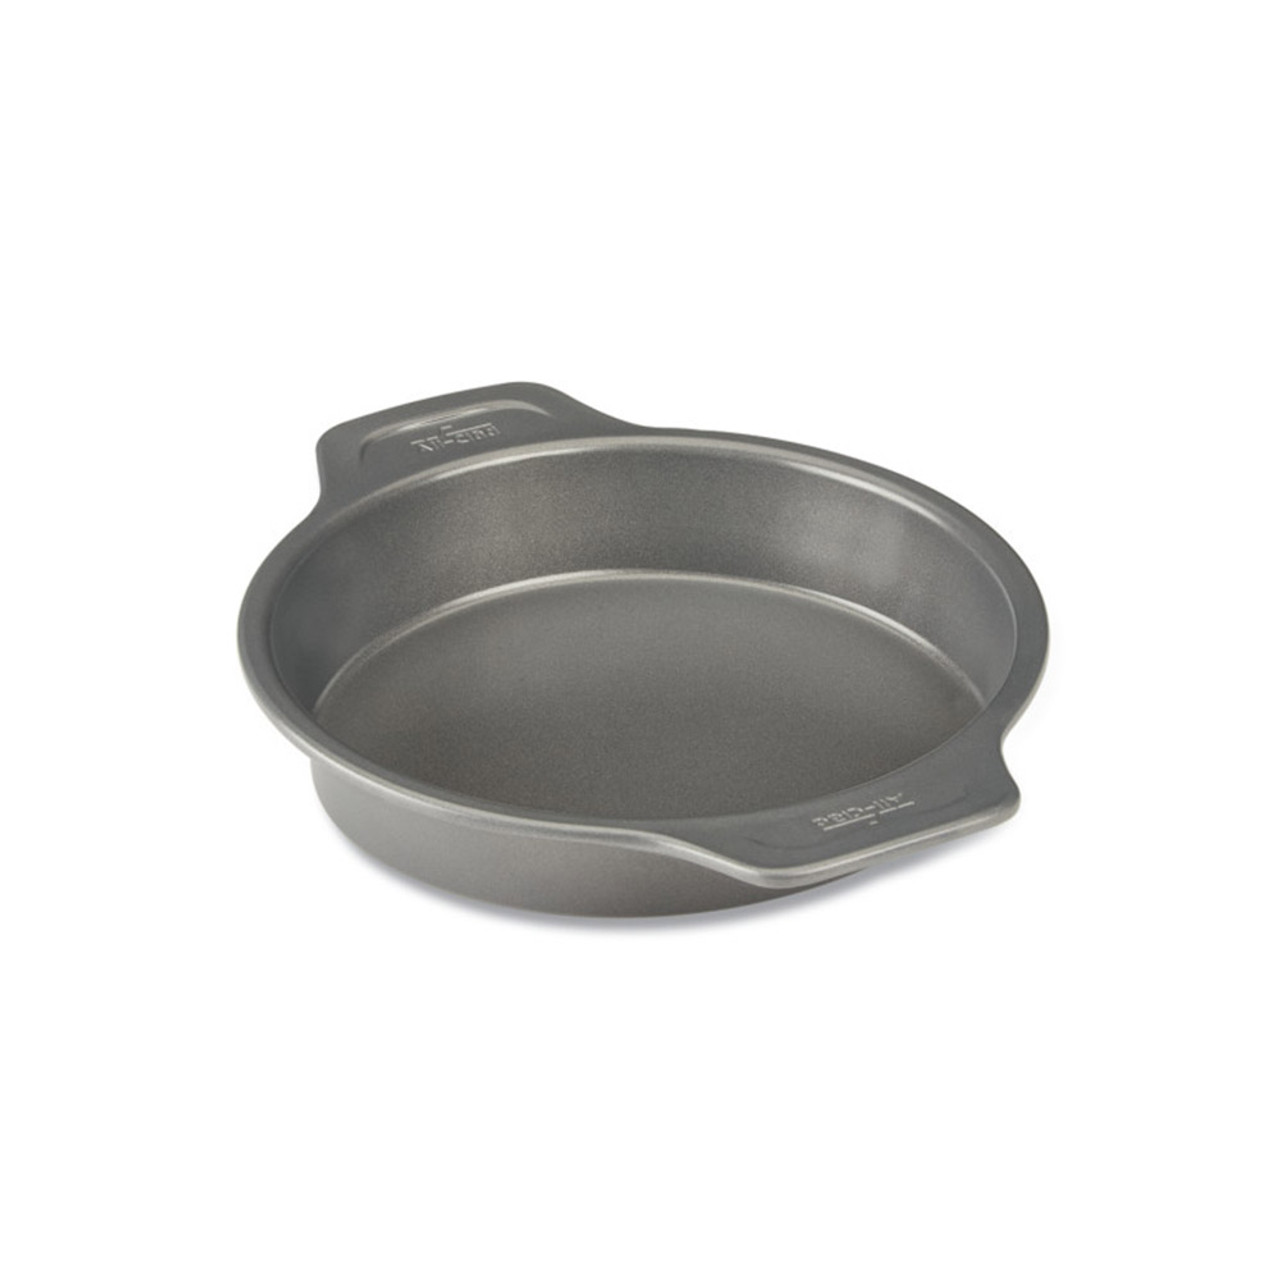 https://cdn11.bigcommerce.com/s-hccytny0od/images/stencil/1280x1280/products/3290/11775/all-clad-pro-release-5pc-bakeware-set-4__27693.1589543483.jpg?c=2?imbypass=on